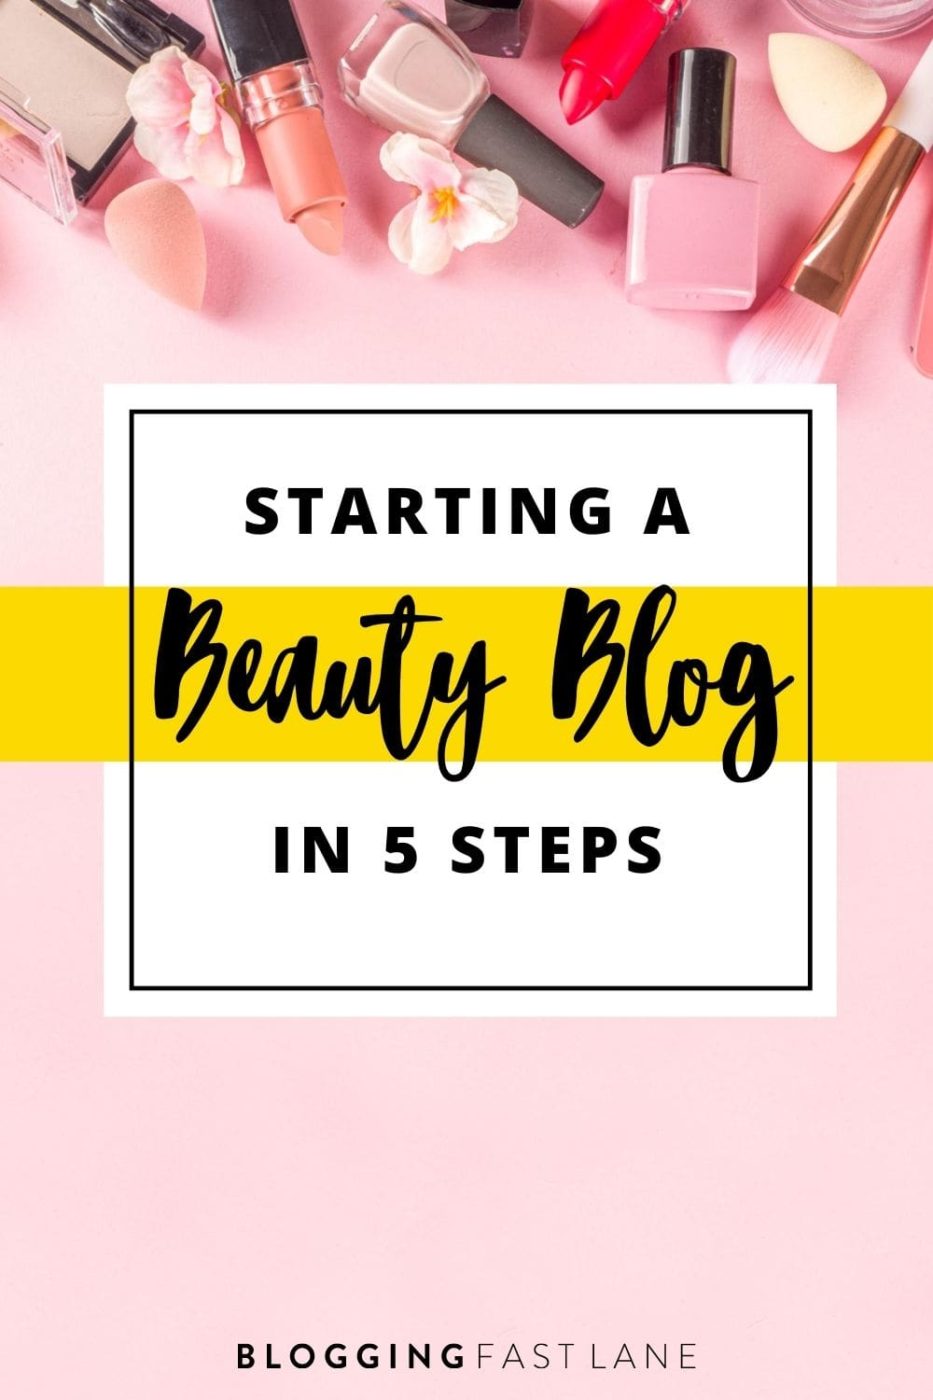 How to Start a Beauty Blog | If you're wondering how to start a beauty blog, click here for our complete guide filled with everything you need to know!